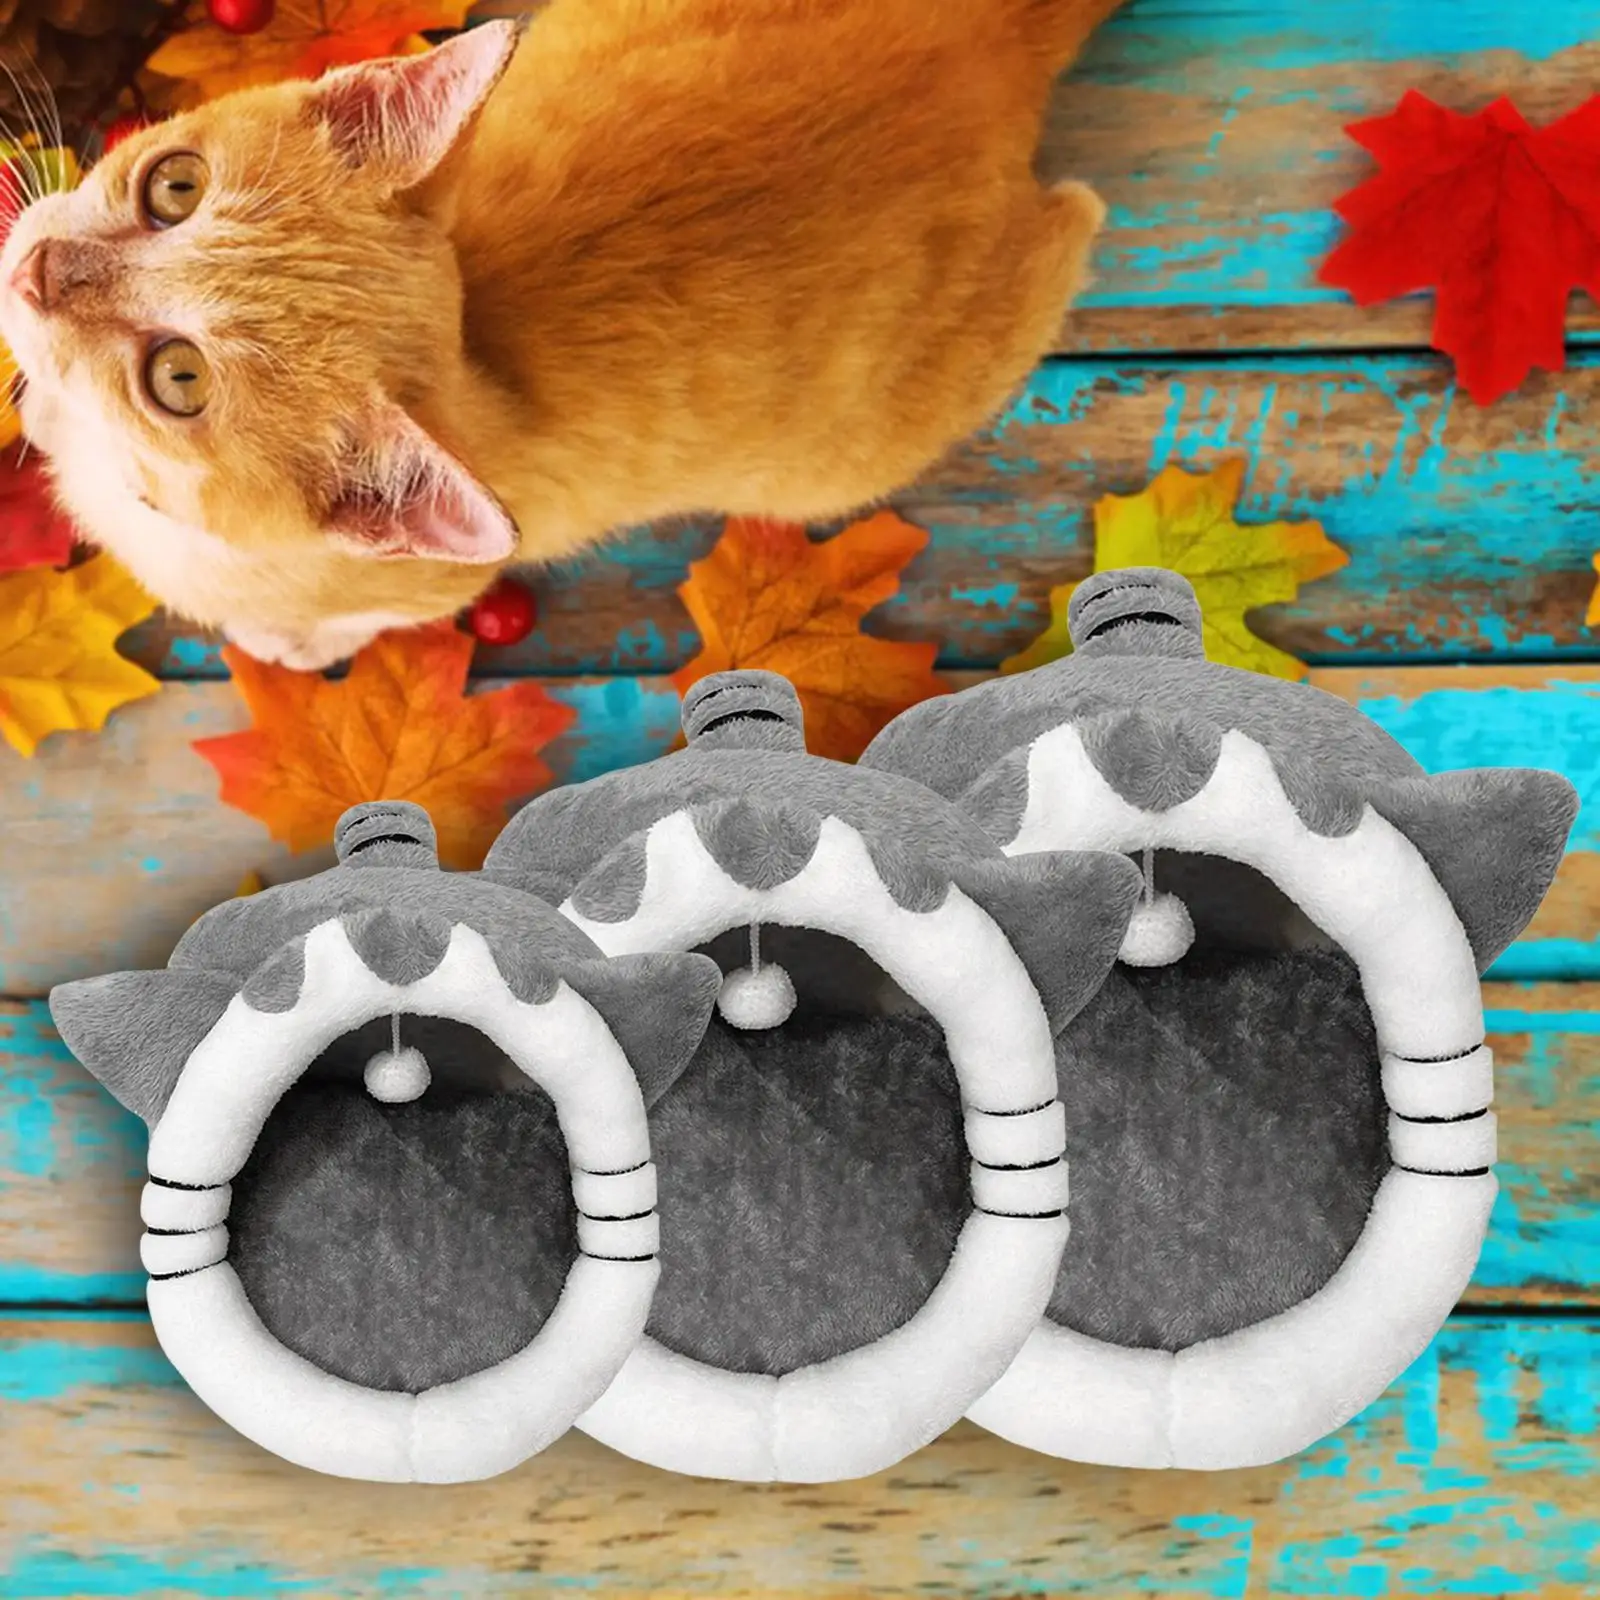 Large Cat Beds with Hanging Toy Anti Slip No Deformation Hideout Basket Warm Soft Washable Pet House Nest for Indoor Cats Kitten